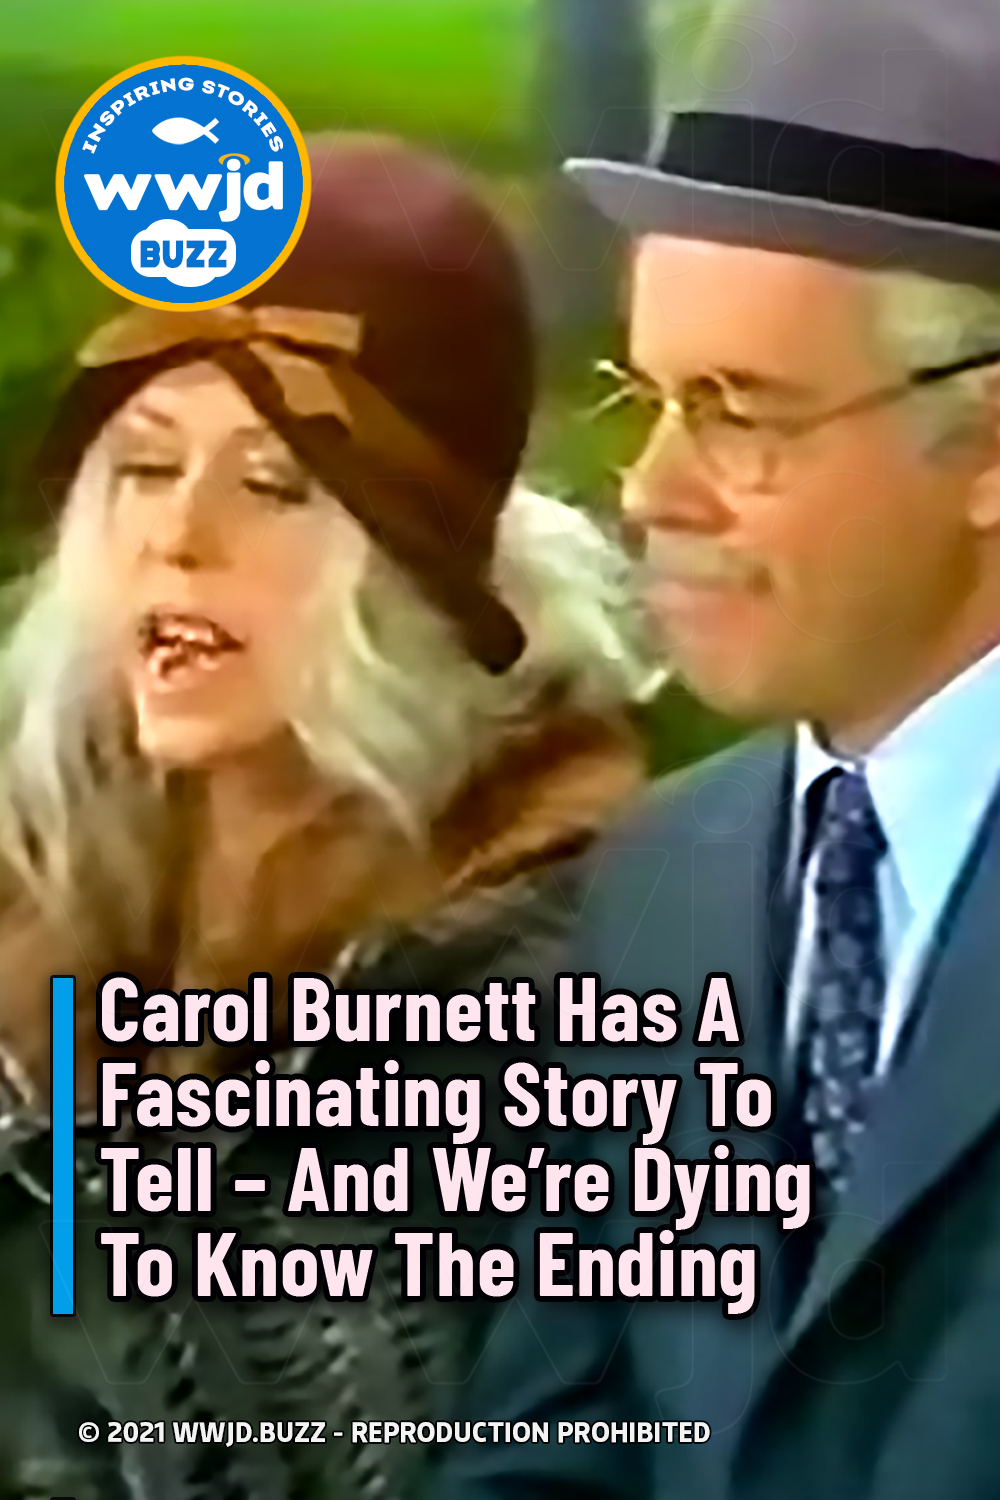 Carol Burnett Has A Fascinating Story To Tell - And We’re Dying To Know The Ending